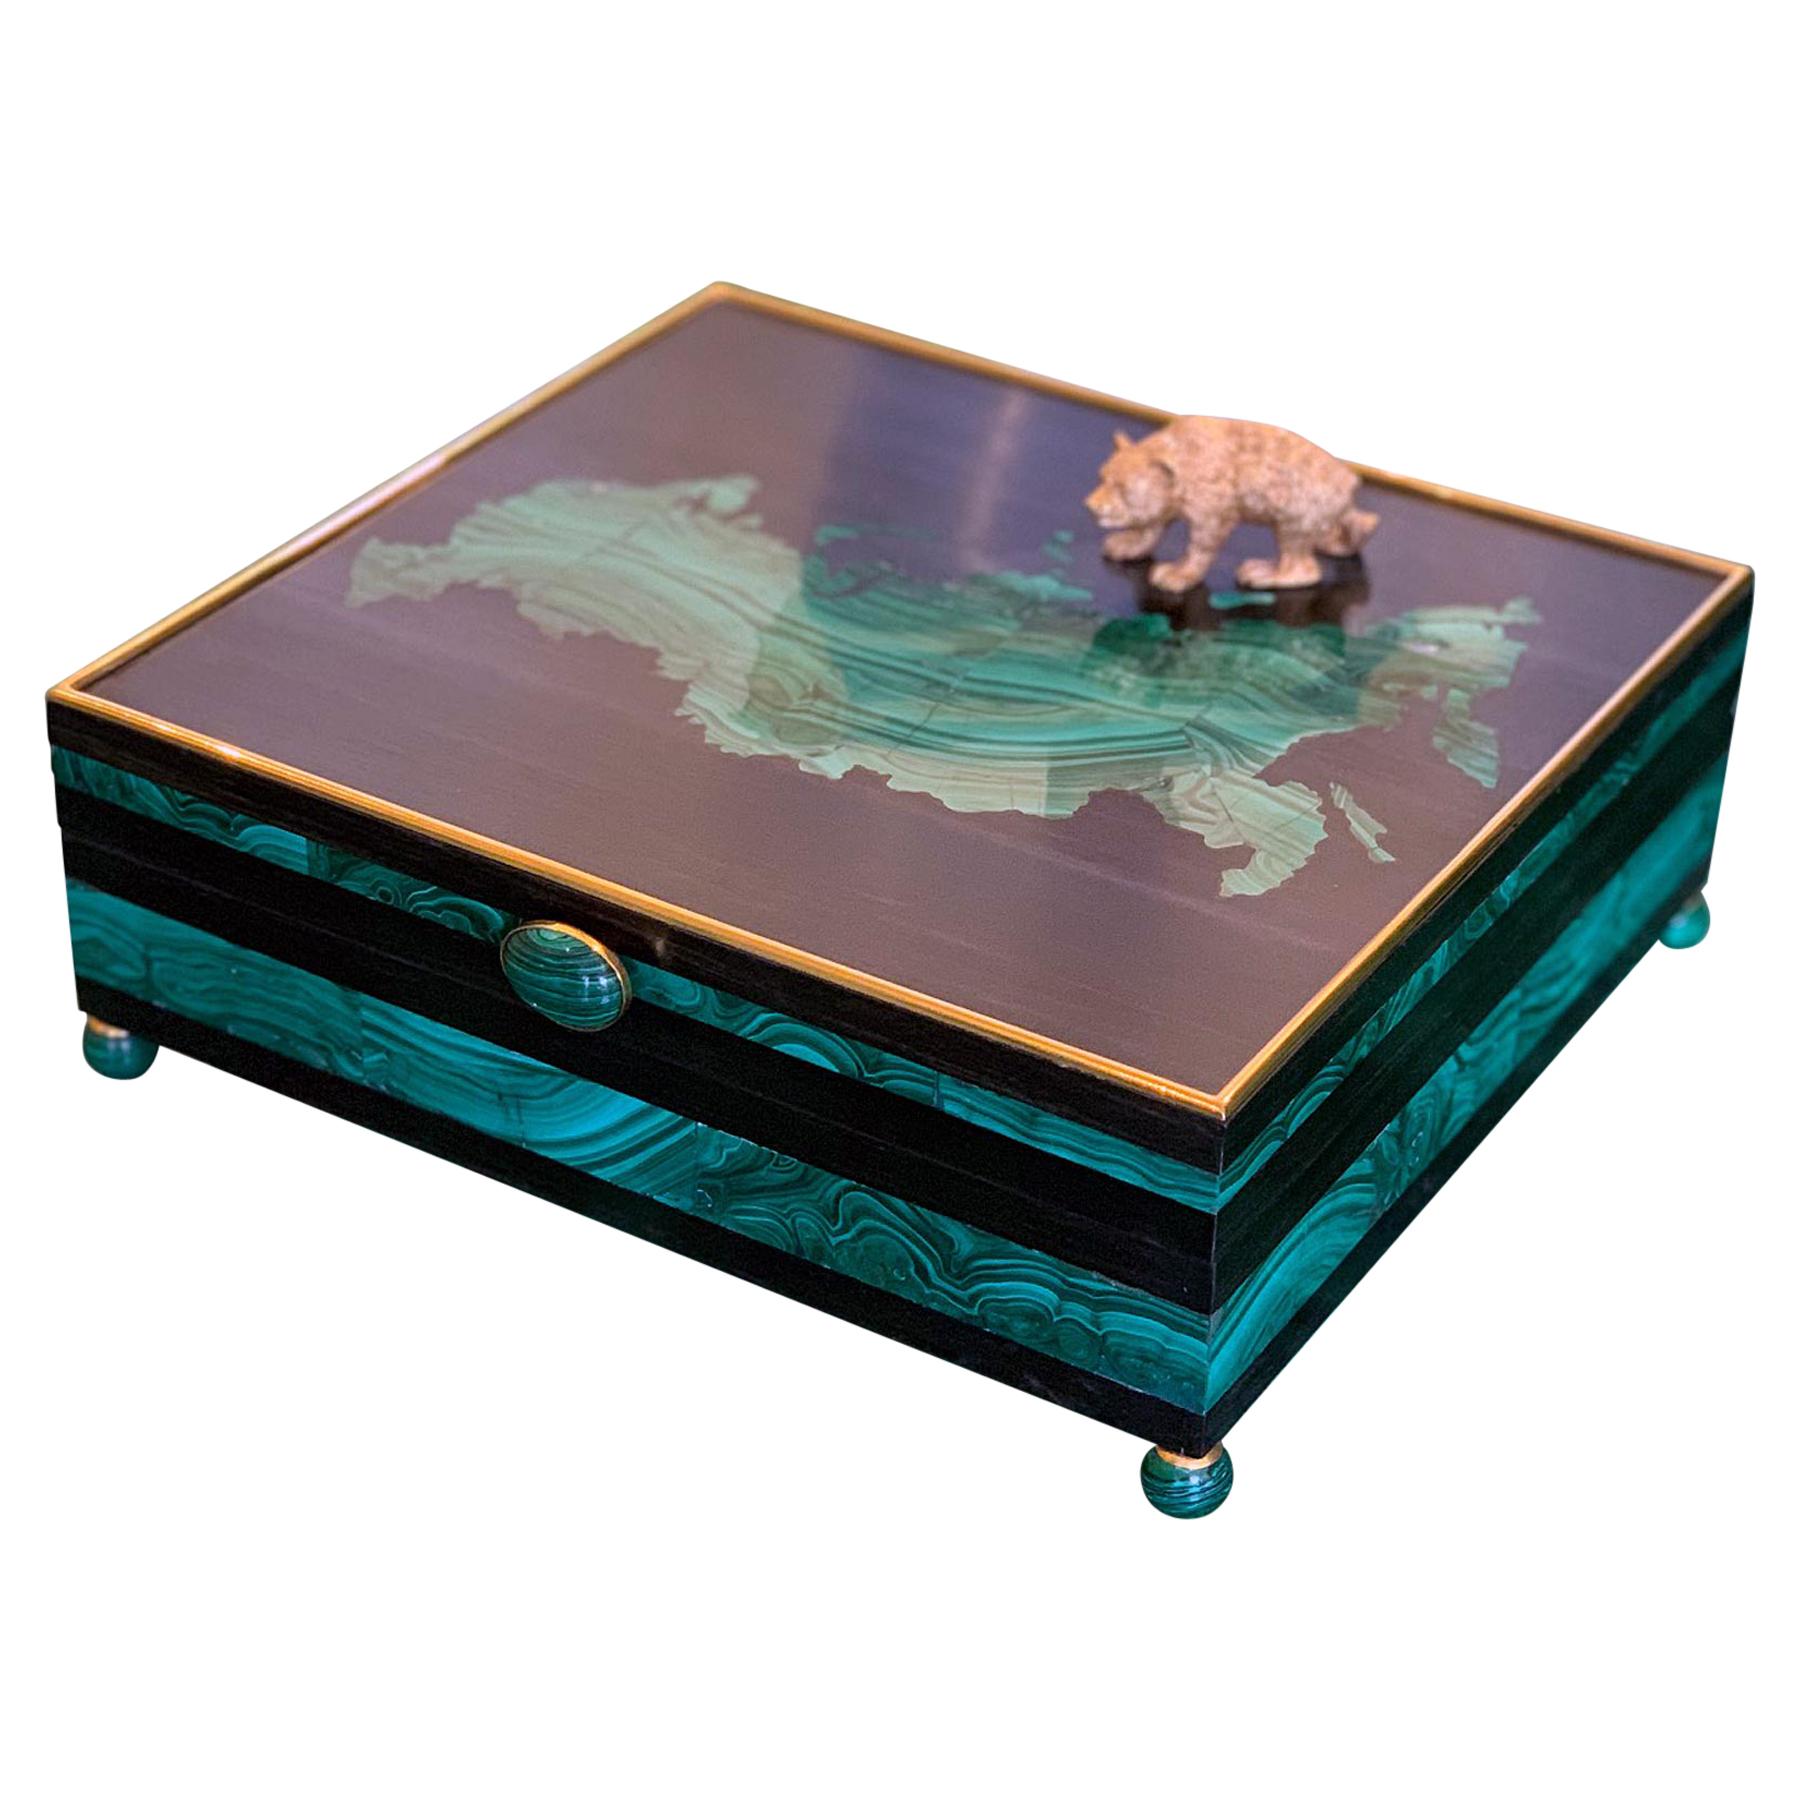 Humidor by Glynn Lockett with Malachite Map of Russia For Sale